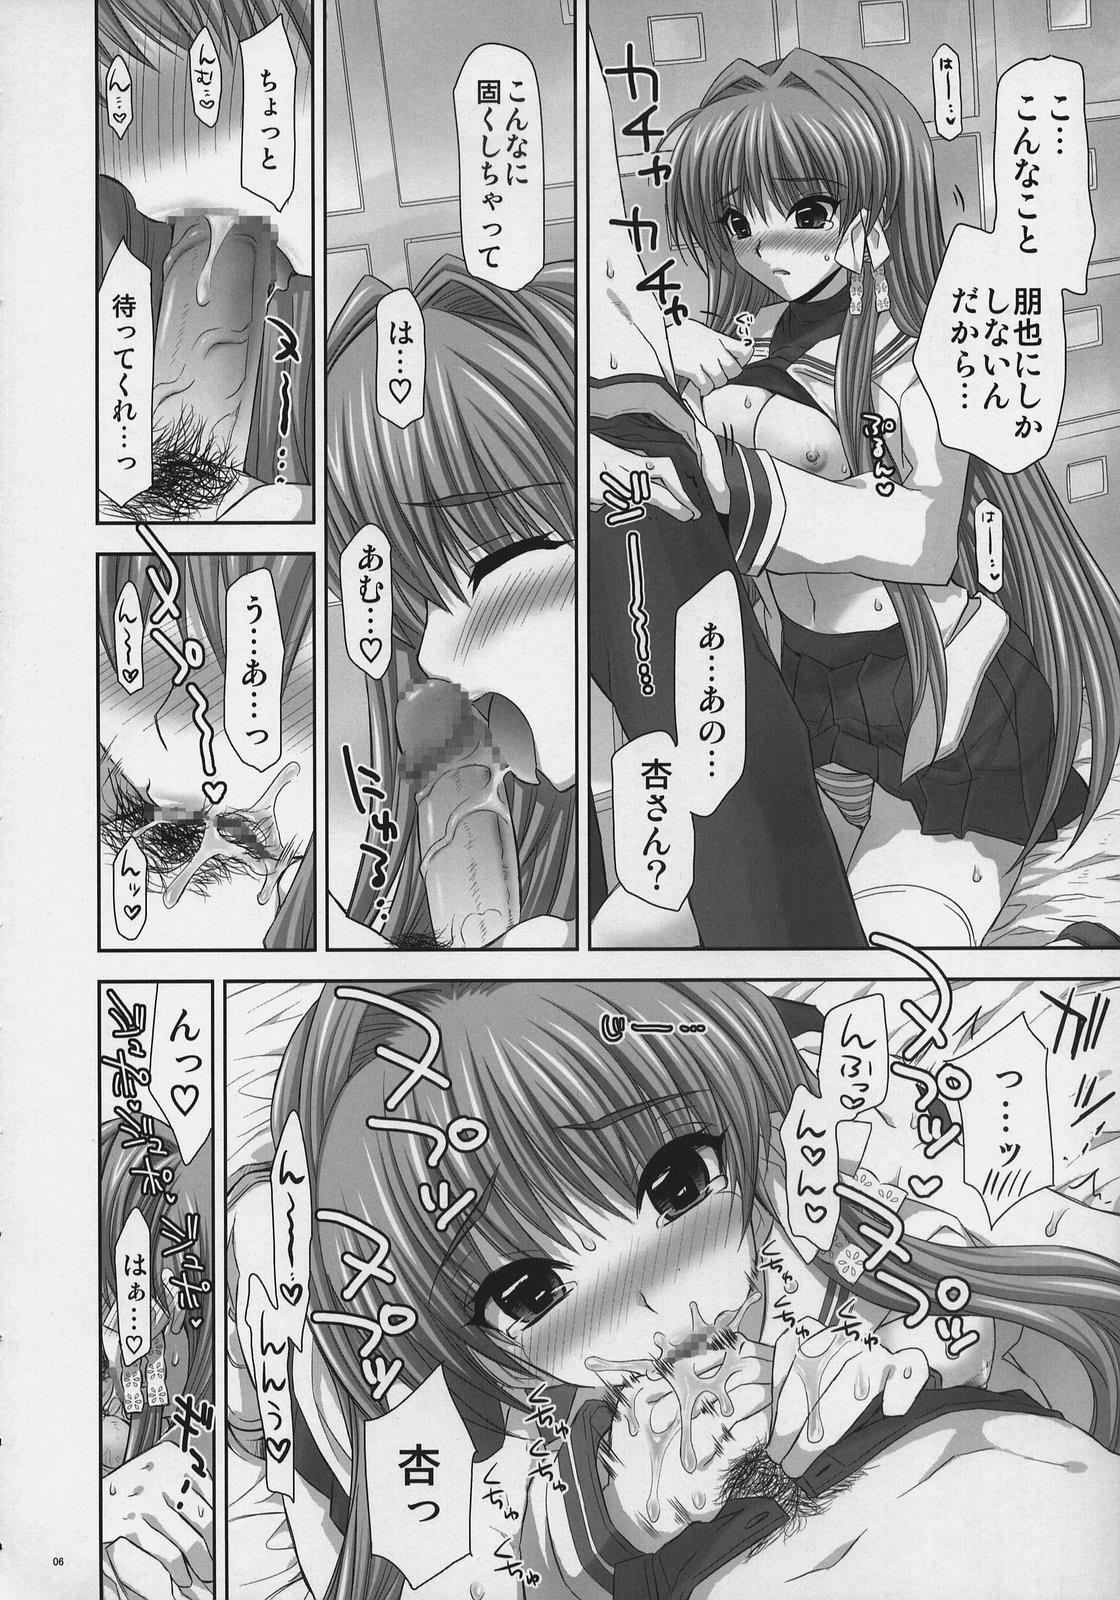 Ass Fucked BEHAVIOR - Clannad Bamboo blade Selfie - Page 5